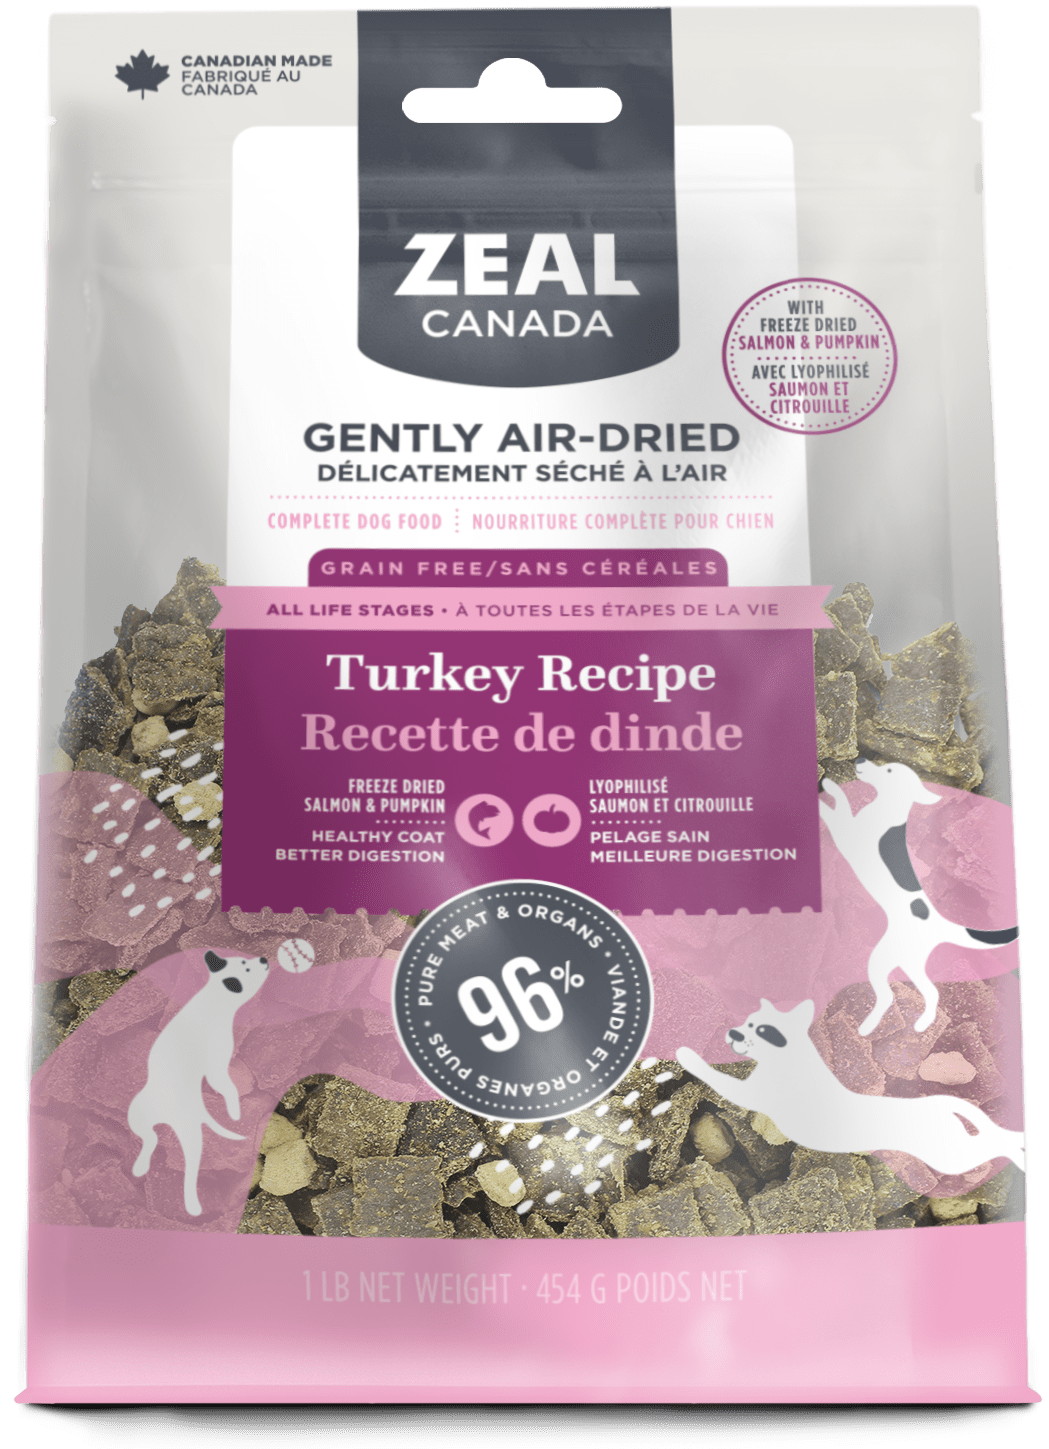 product image for Gently Air-Dried Turkey with Freeze-Dried Salmon & Pumpkin for Dogs